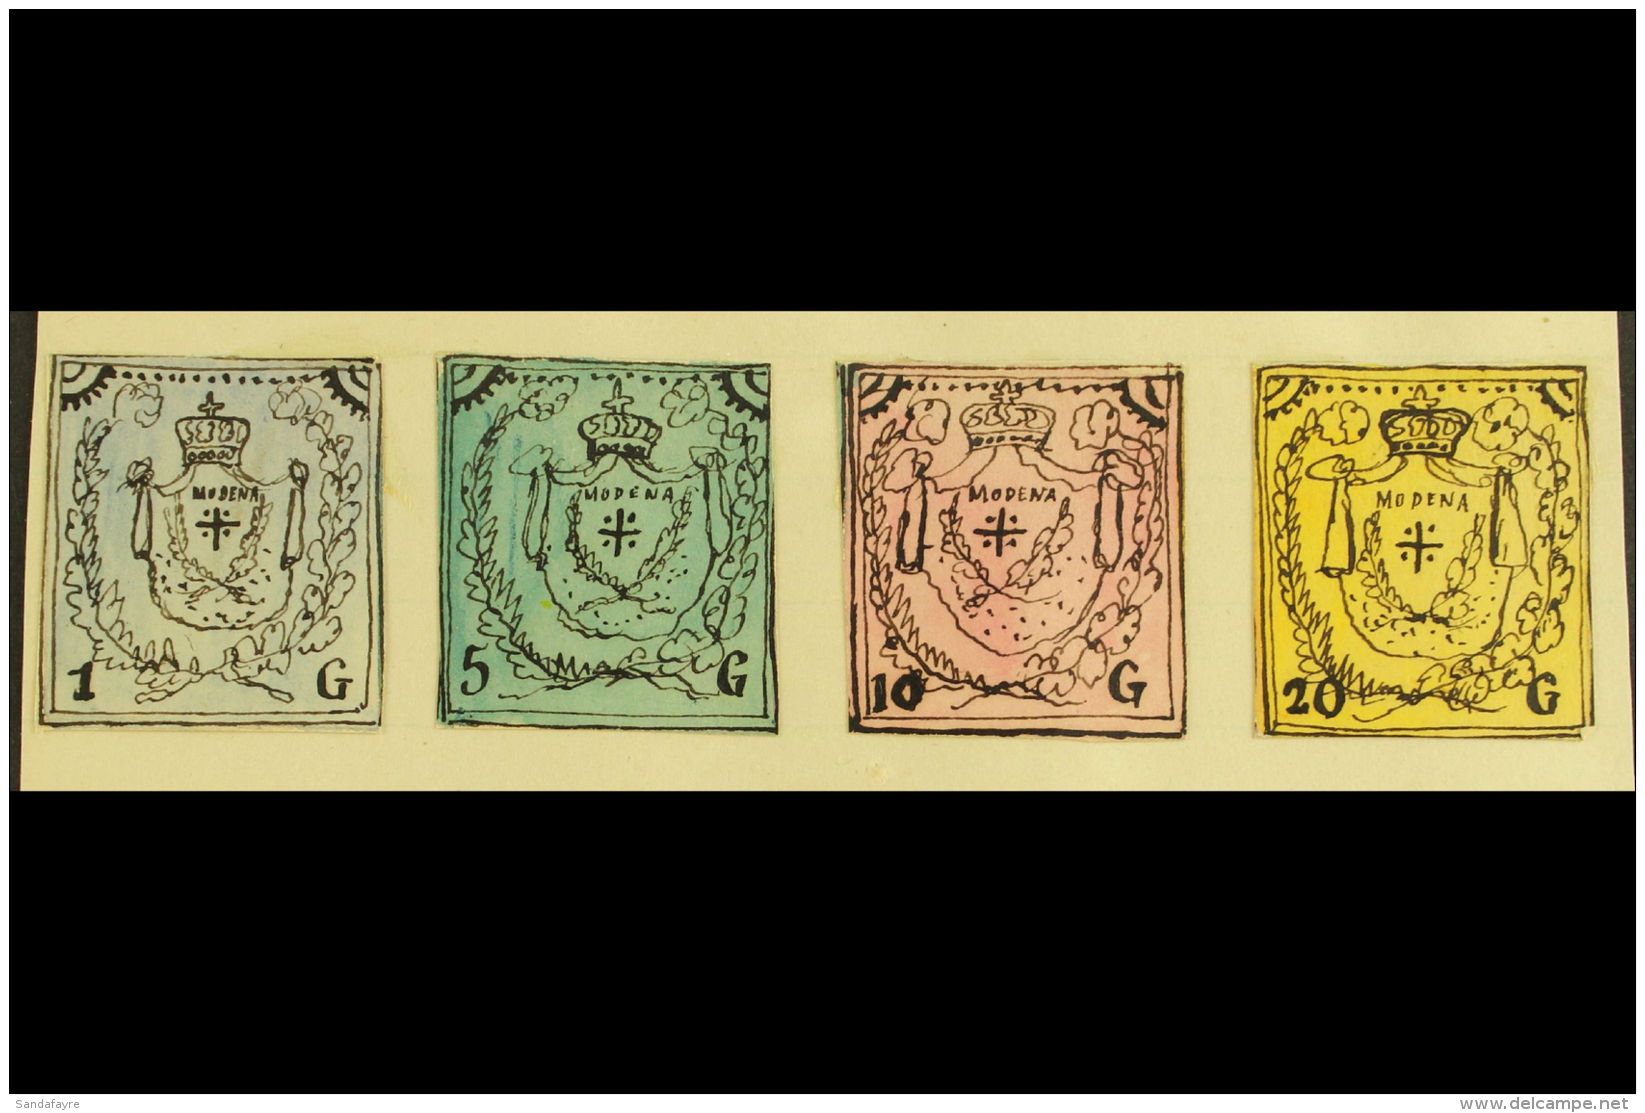 1861 HAND PAINTED STAMPS  Unique Miniature Artworks Created By A French "Timbrophile" In 1861. MODENA Four Values... - Unclassified